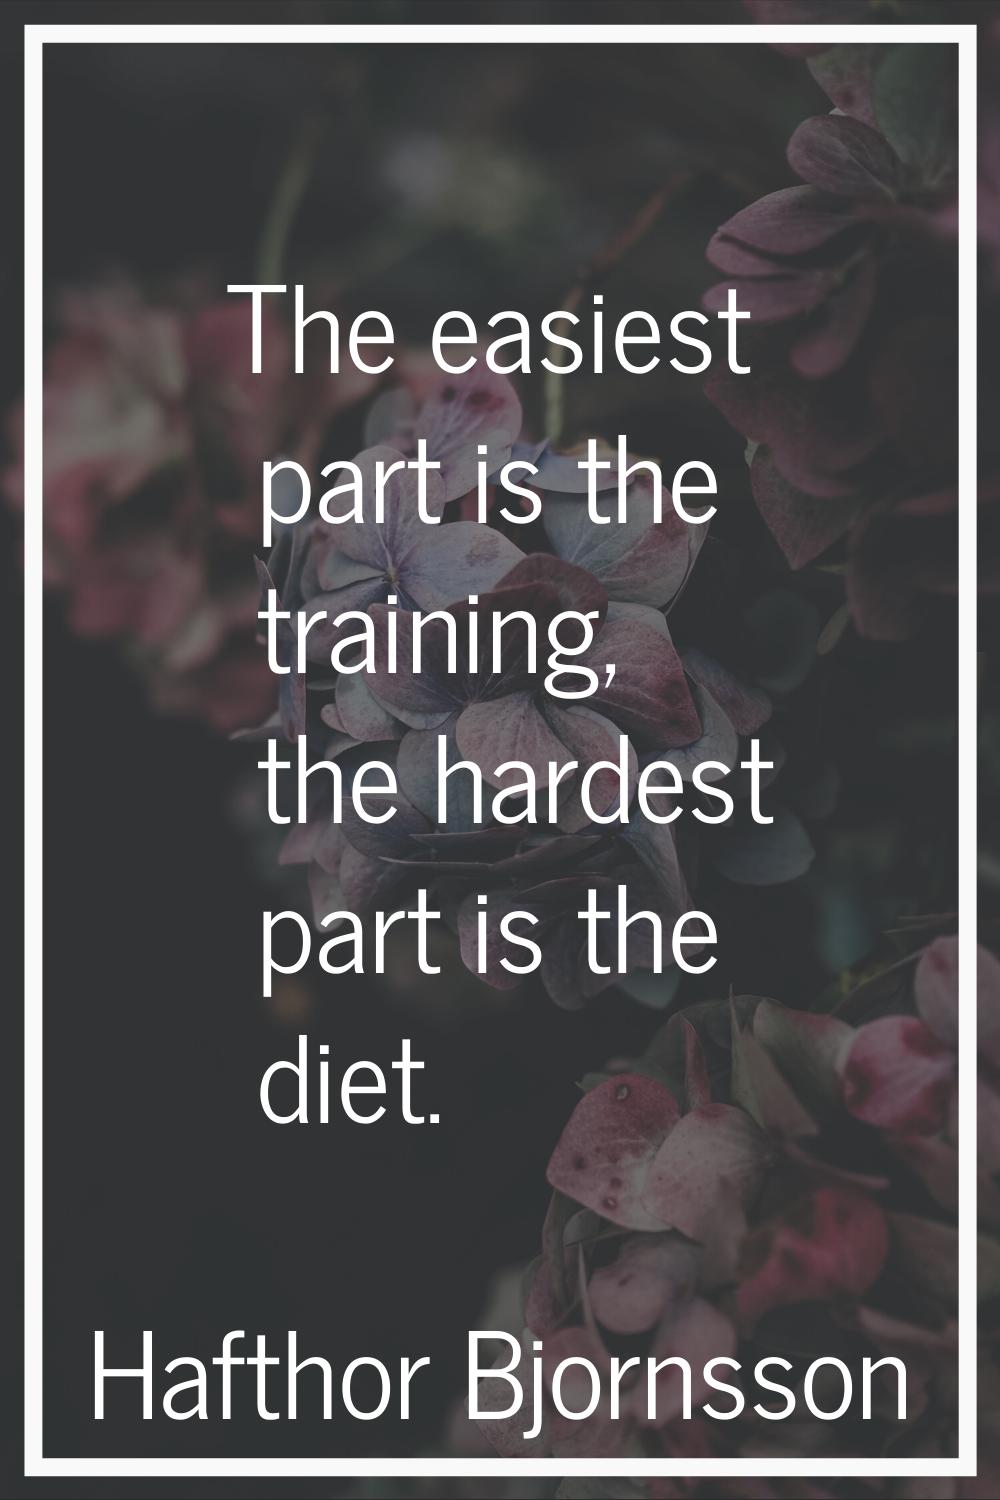 The easiest part is the training, the hardest part is the diet.